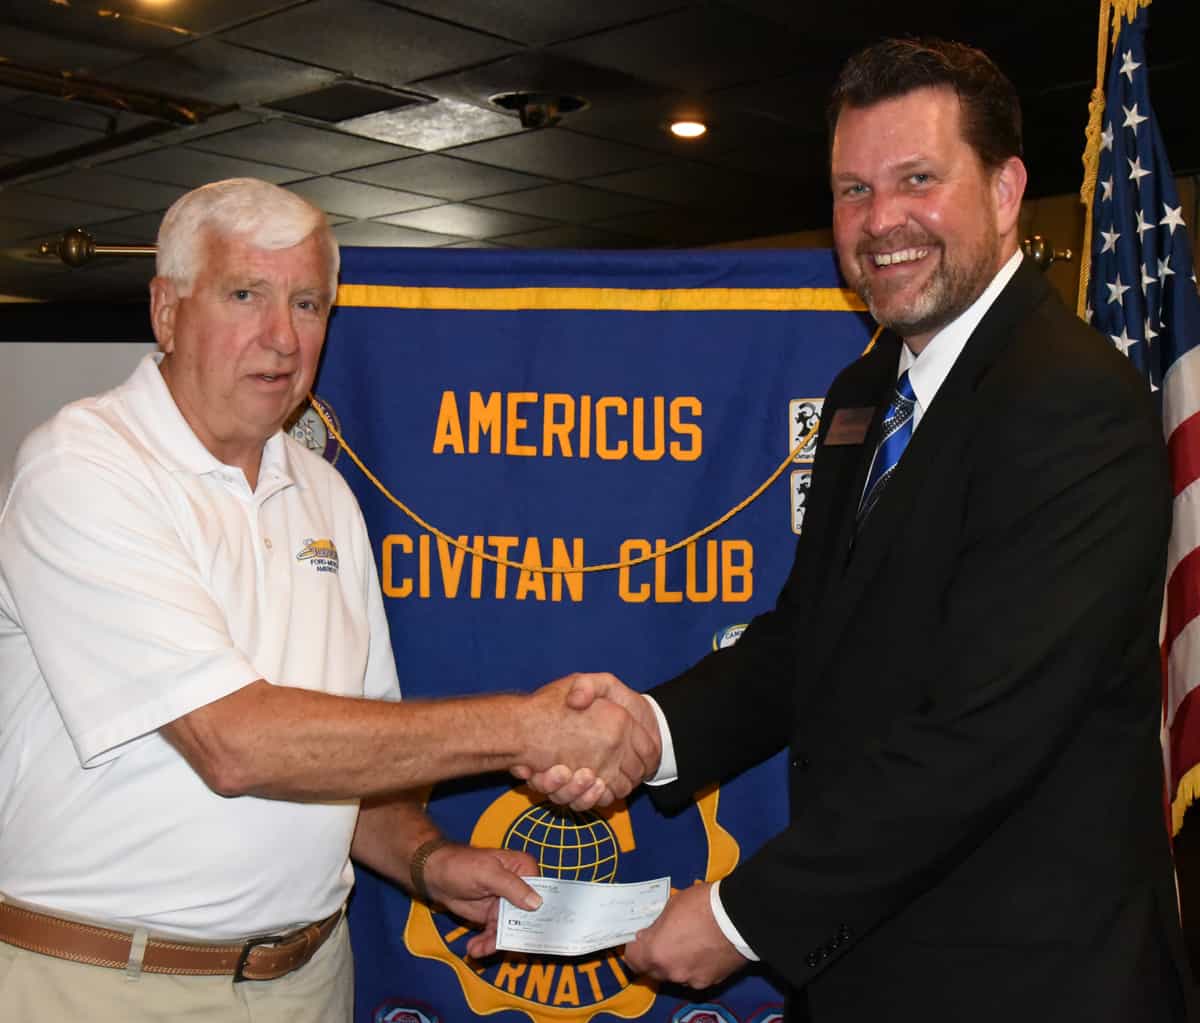 Americus Civitan Club President Grant Williams (left) is shown above presenting a check to South Georgia Technical College President Dr. John Watford for the Americus Civitan Club’s endowed scholarship for nursing students at South Georgia Technical College.